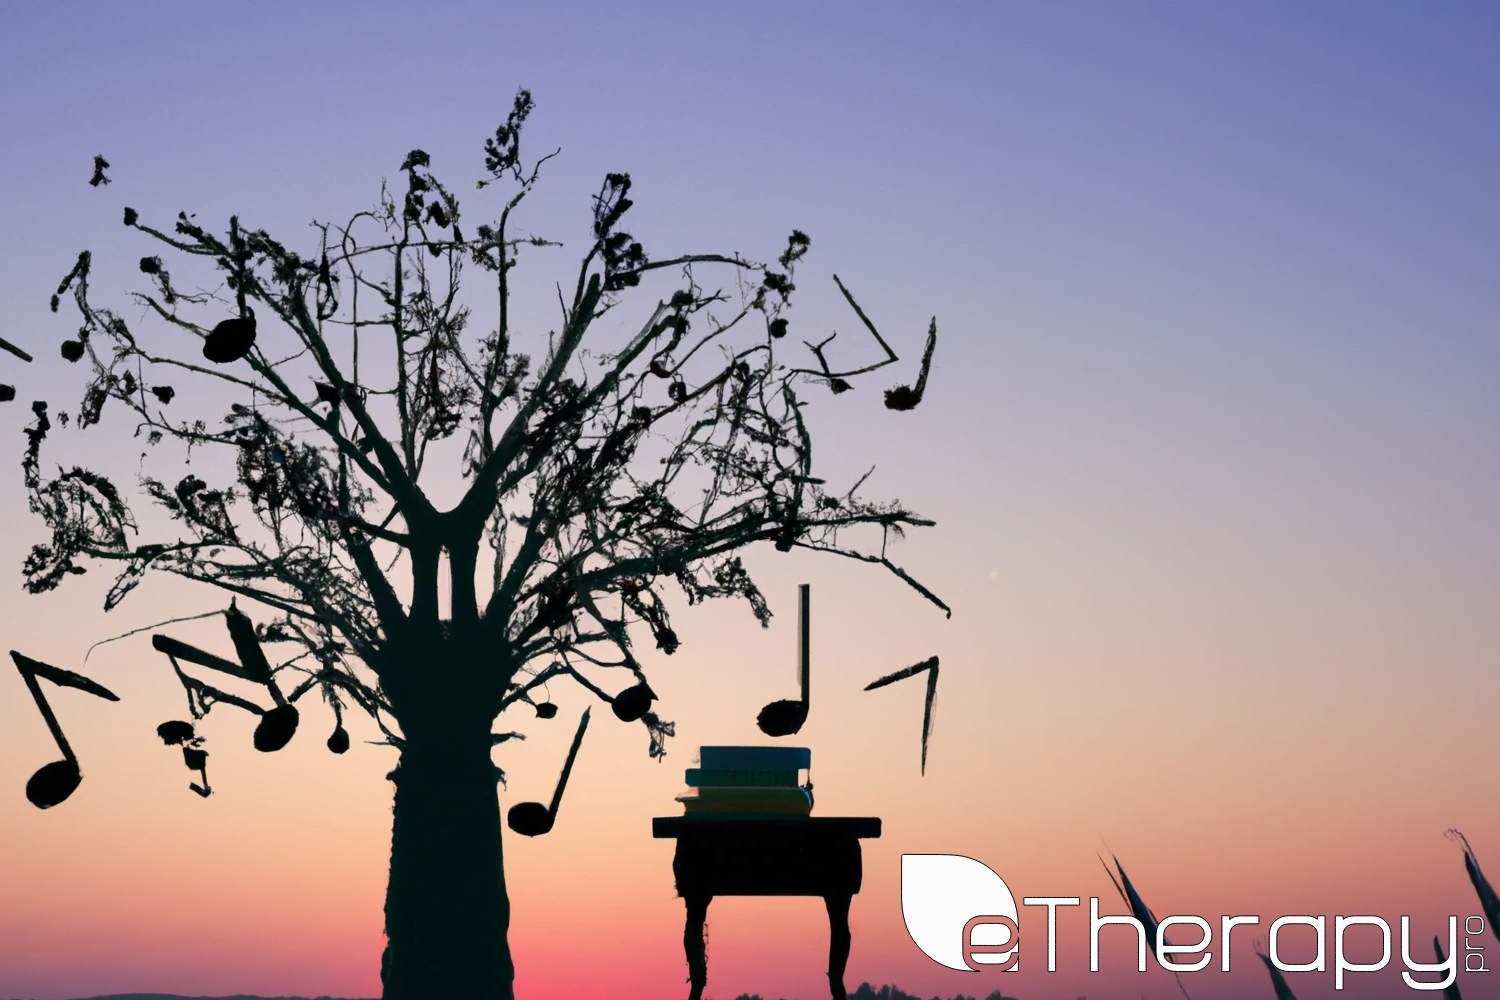 A large tree with branches shaped as musical notes, art tools, and books, set against a pastel sunrise background - Why Might a Workshop or Class Be Your Next Best Move